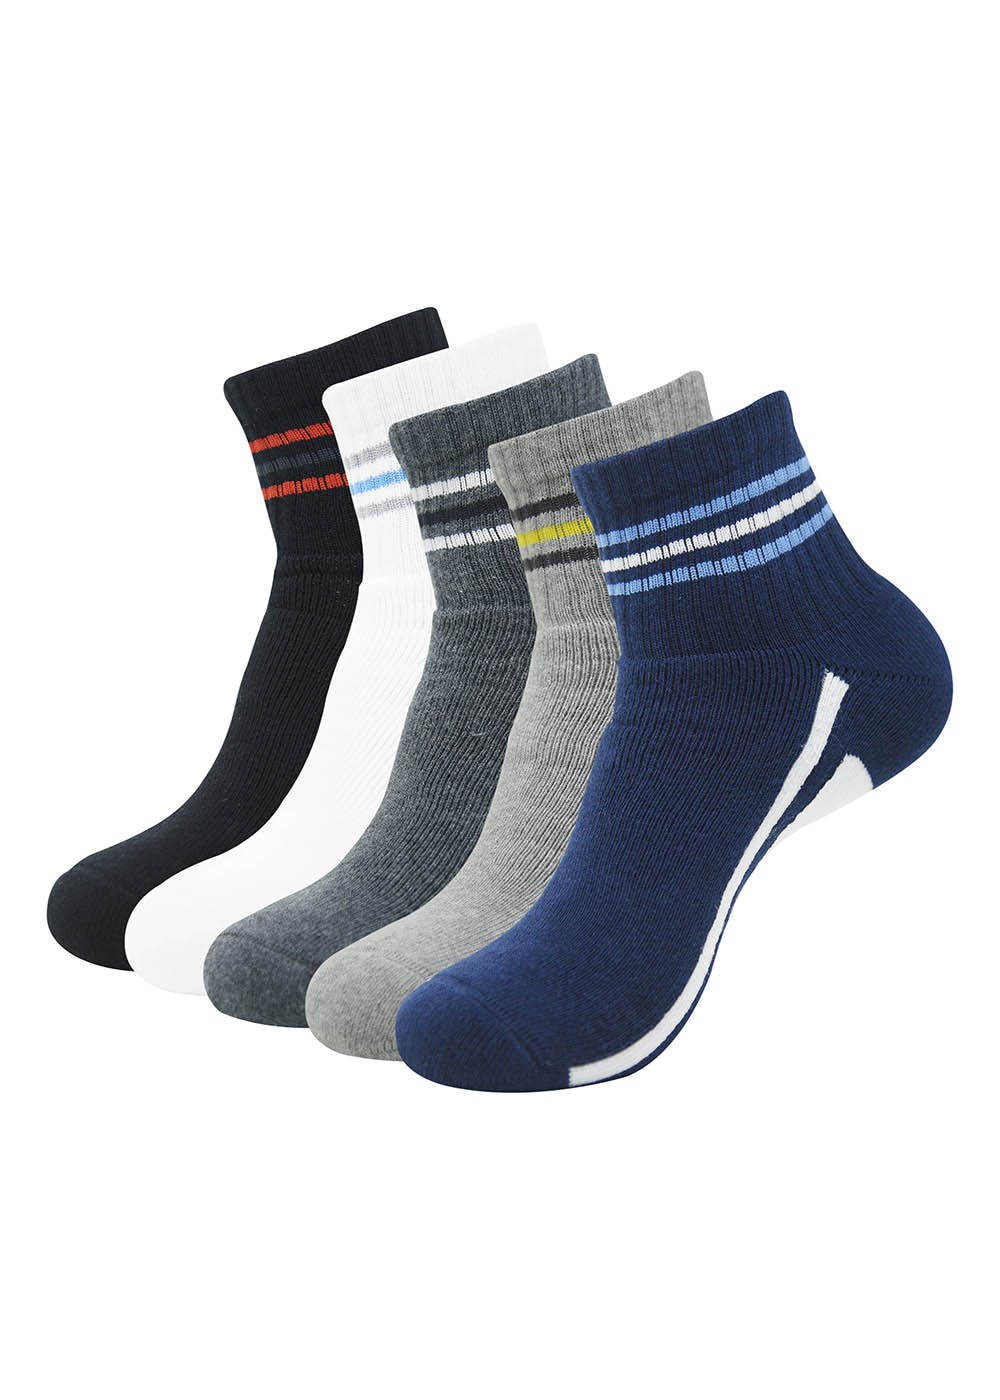 Get Set of 5 Self Woven Cushioned High Ankle Socks at ₹ 545 | LBB Shop